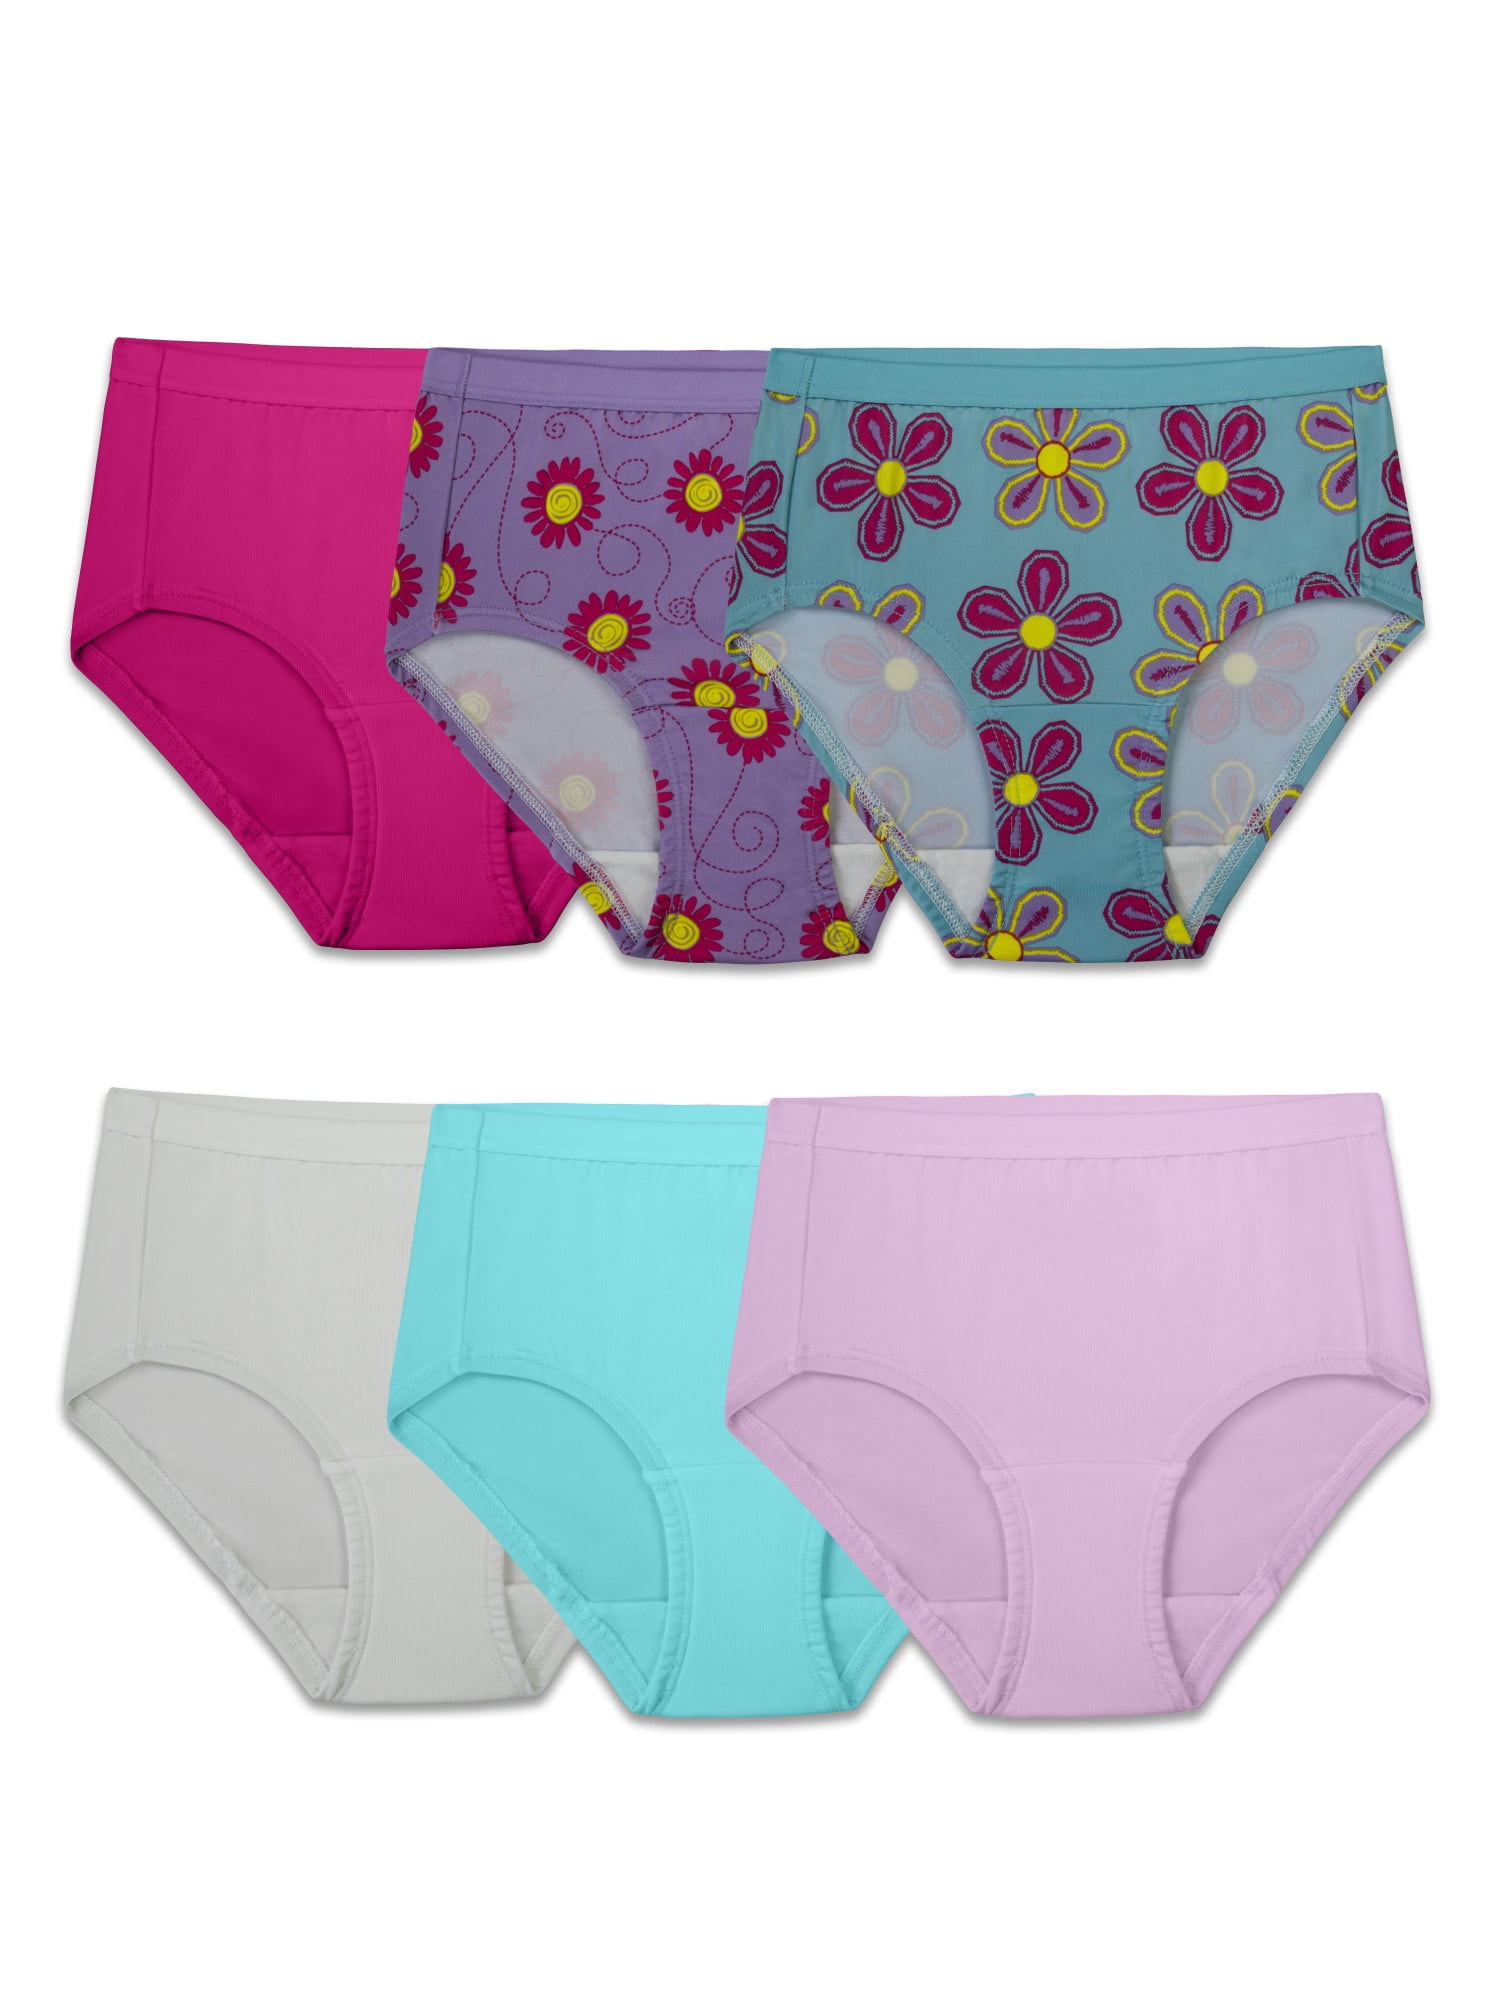 Fruit of the Loom Girls' Assorted Cotton Brief Underwear, 6 Pack Panties  Sizes 4 - 14